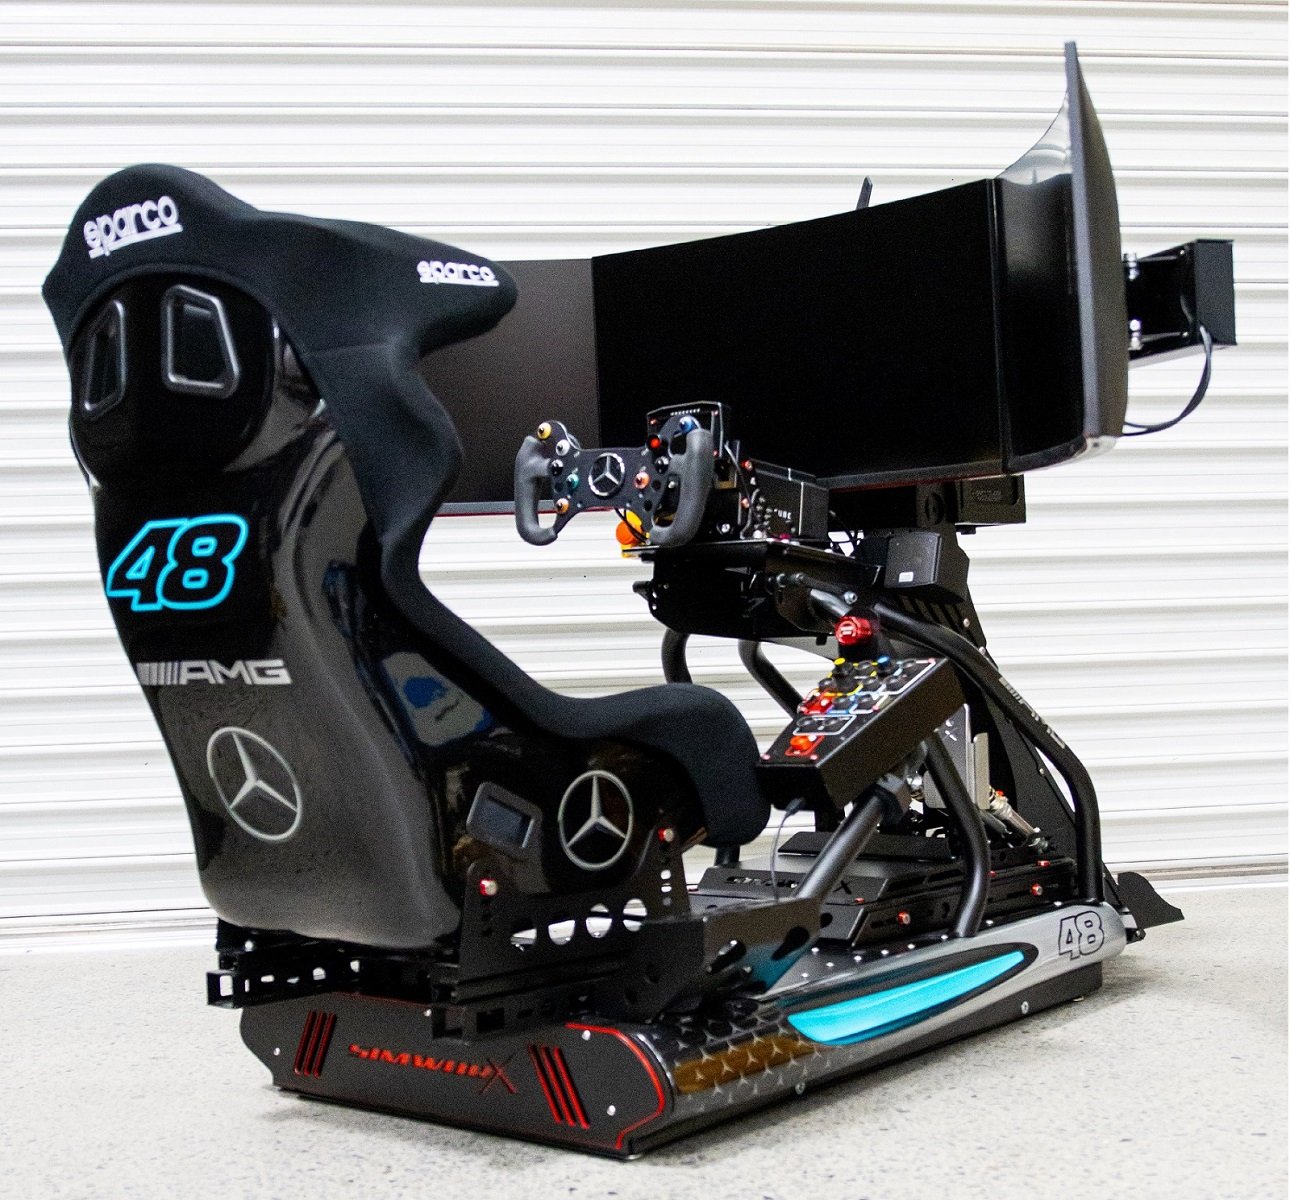 Inside the most realistic F1 simulator you can buy